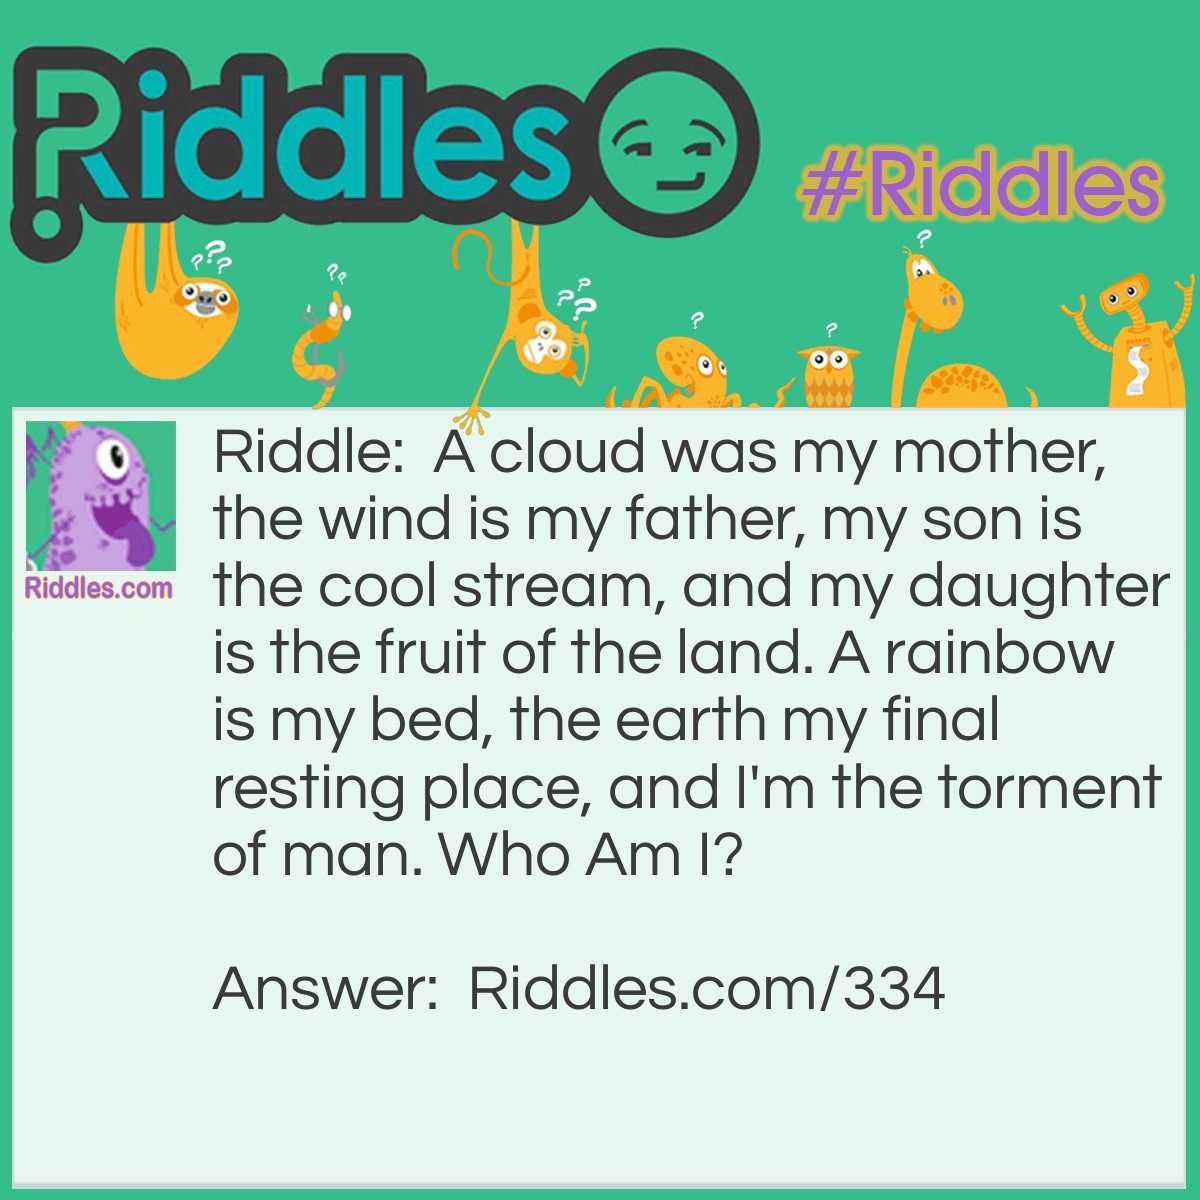 Riddle: A cloud was my mother, the wind is my father, my son is the cool stream, and my daughter is the fruit of the land. A rainbow is my bed, the earth my final resting place, and I'm the torment of man. <a href="/who-am-i-riddles">Who Am I</a>? Answer: Rain.